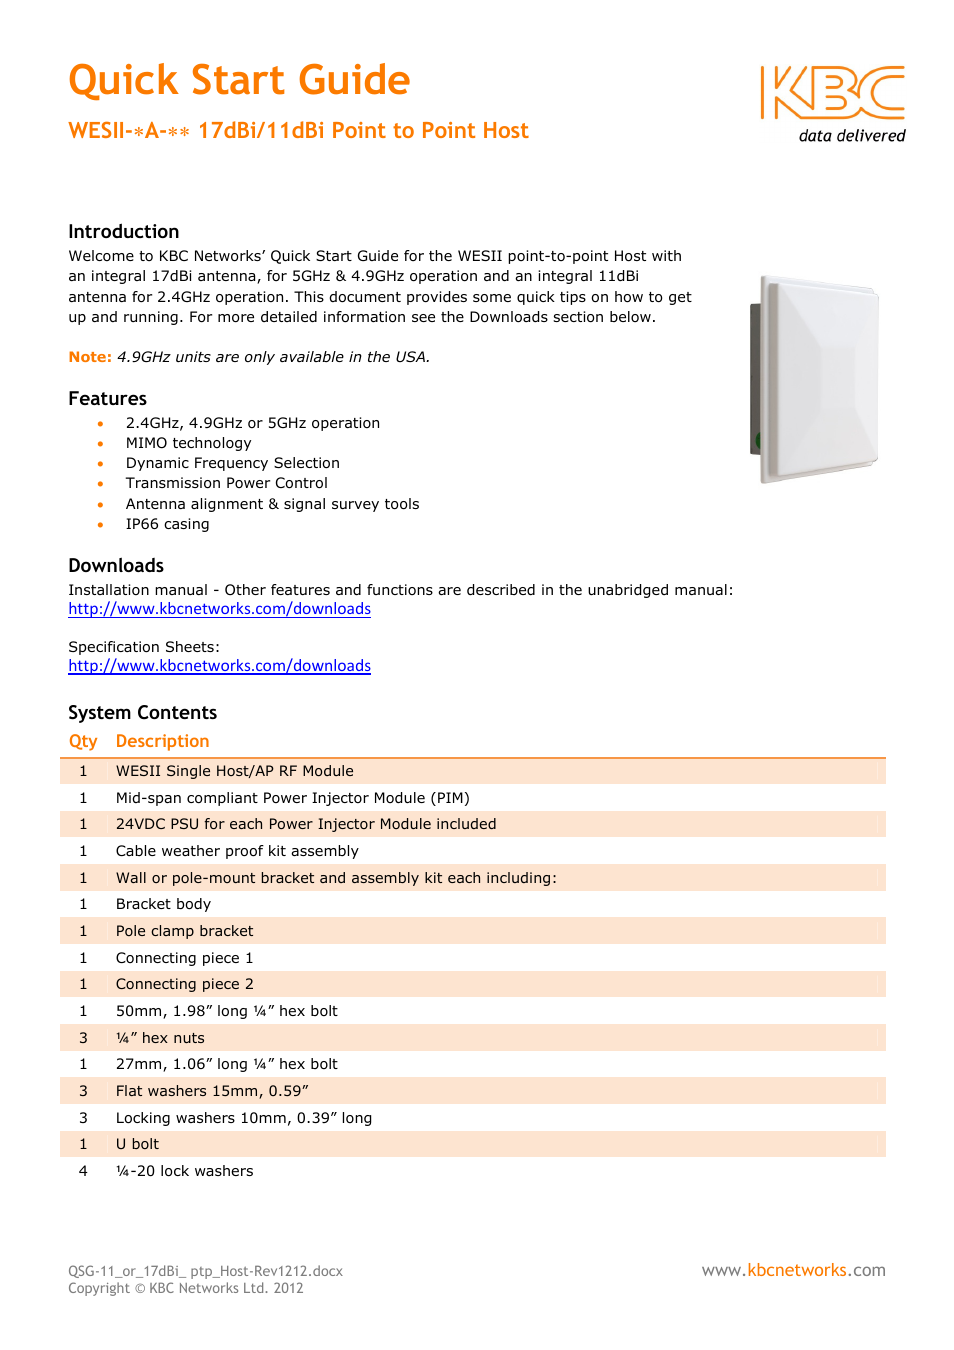 WESII 9dBi Point-to-Point / Point-to-Multipoint Host